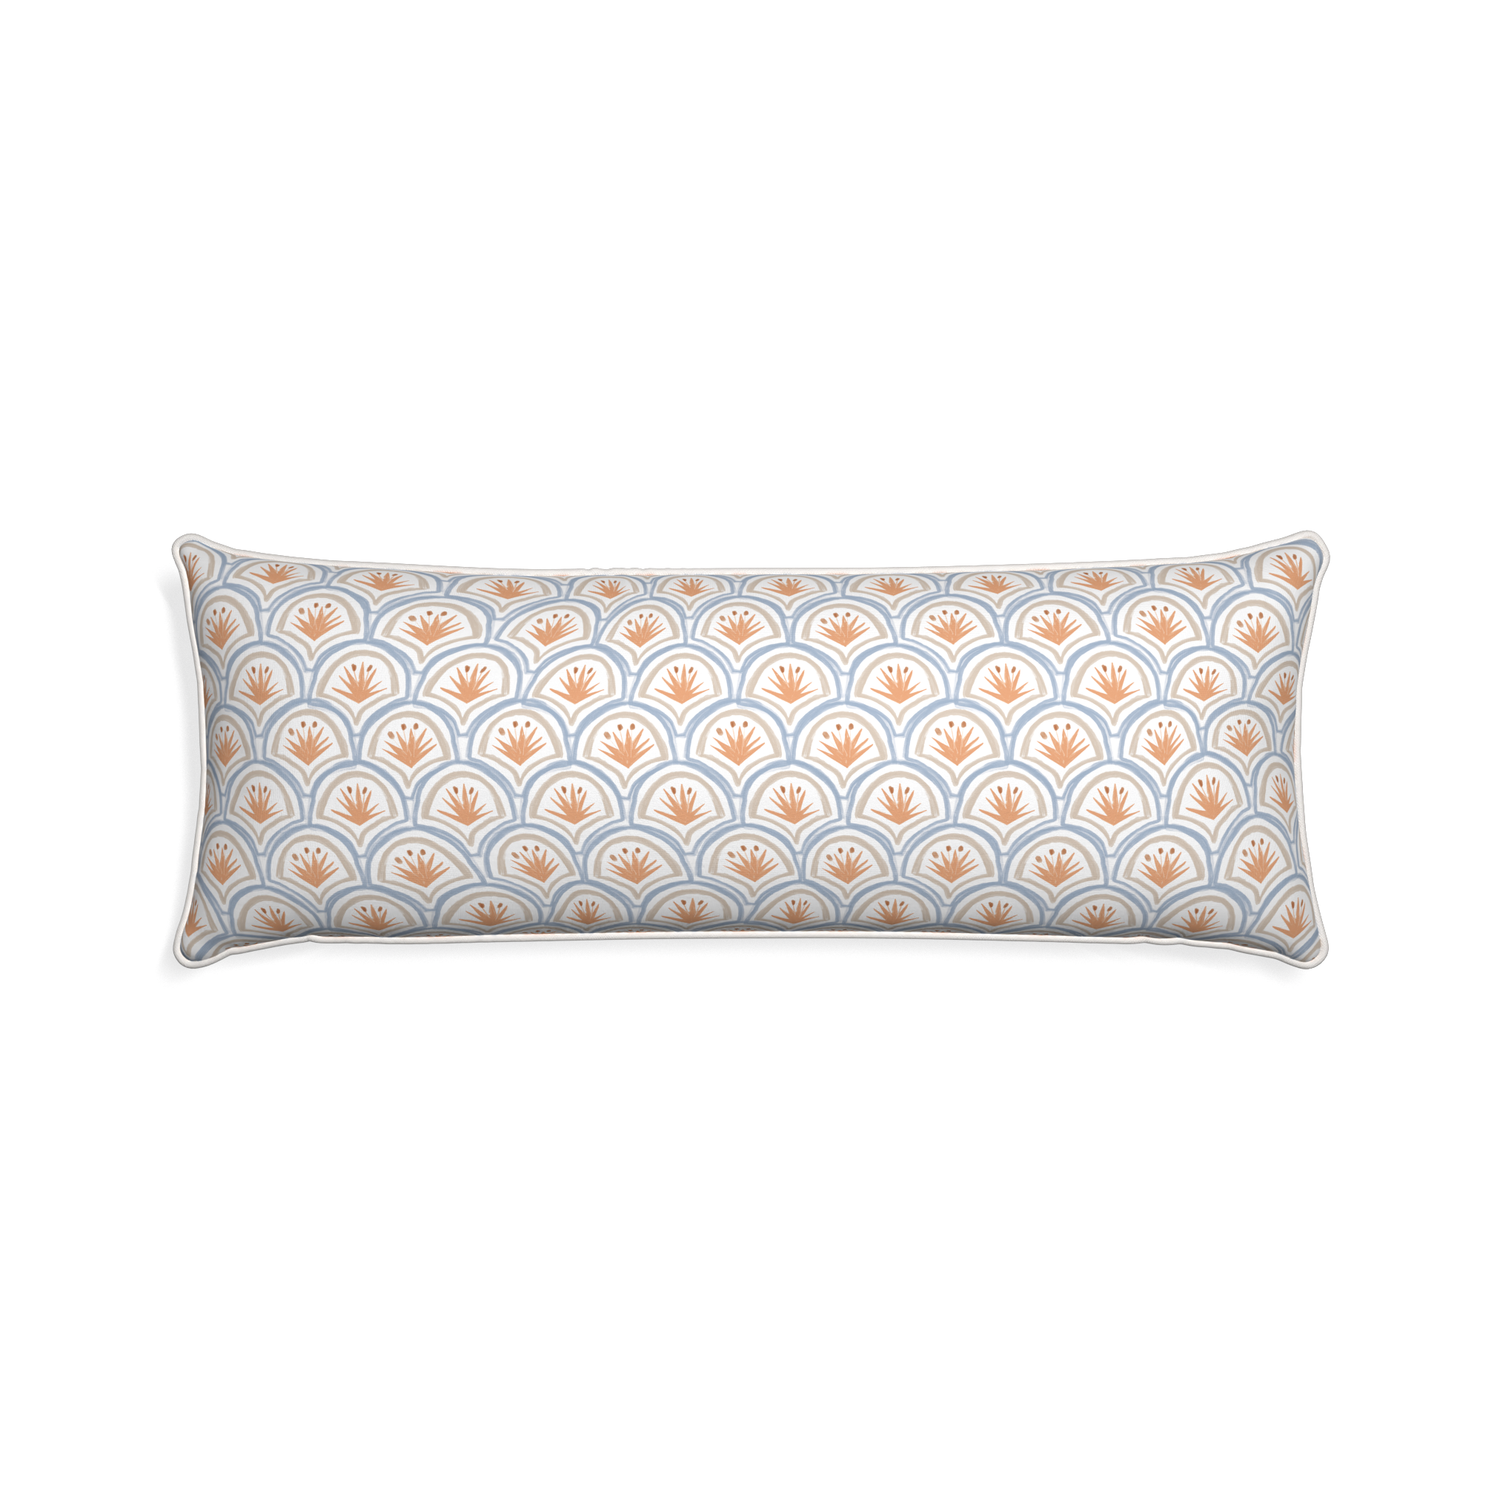 Xl-lumbar thatcher apricot custom art deco palm patternpillow with snow piping on white background